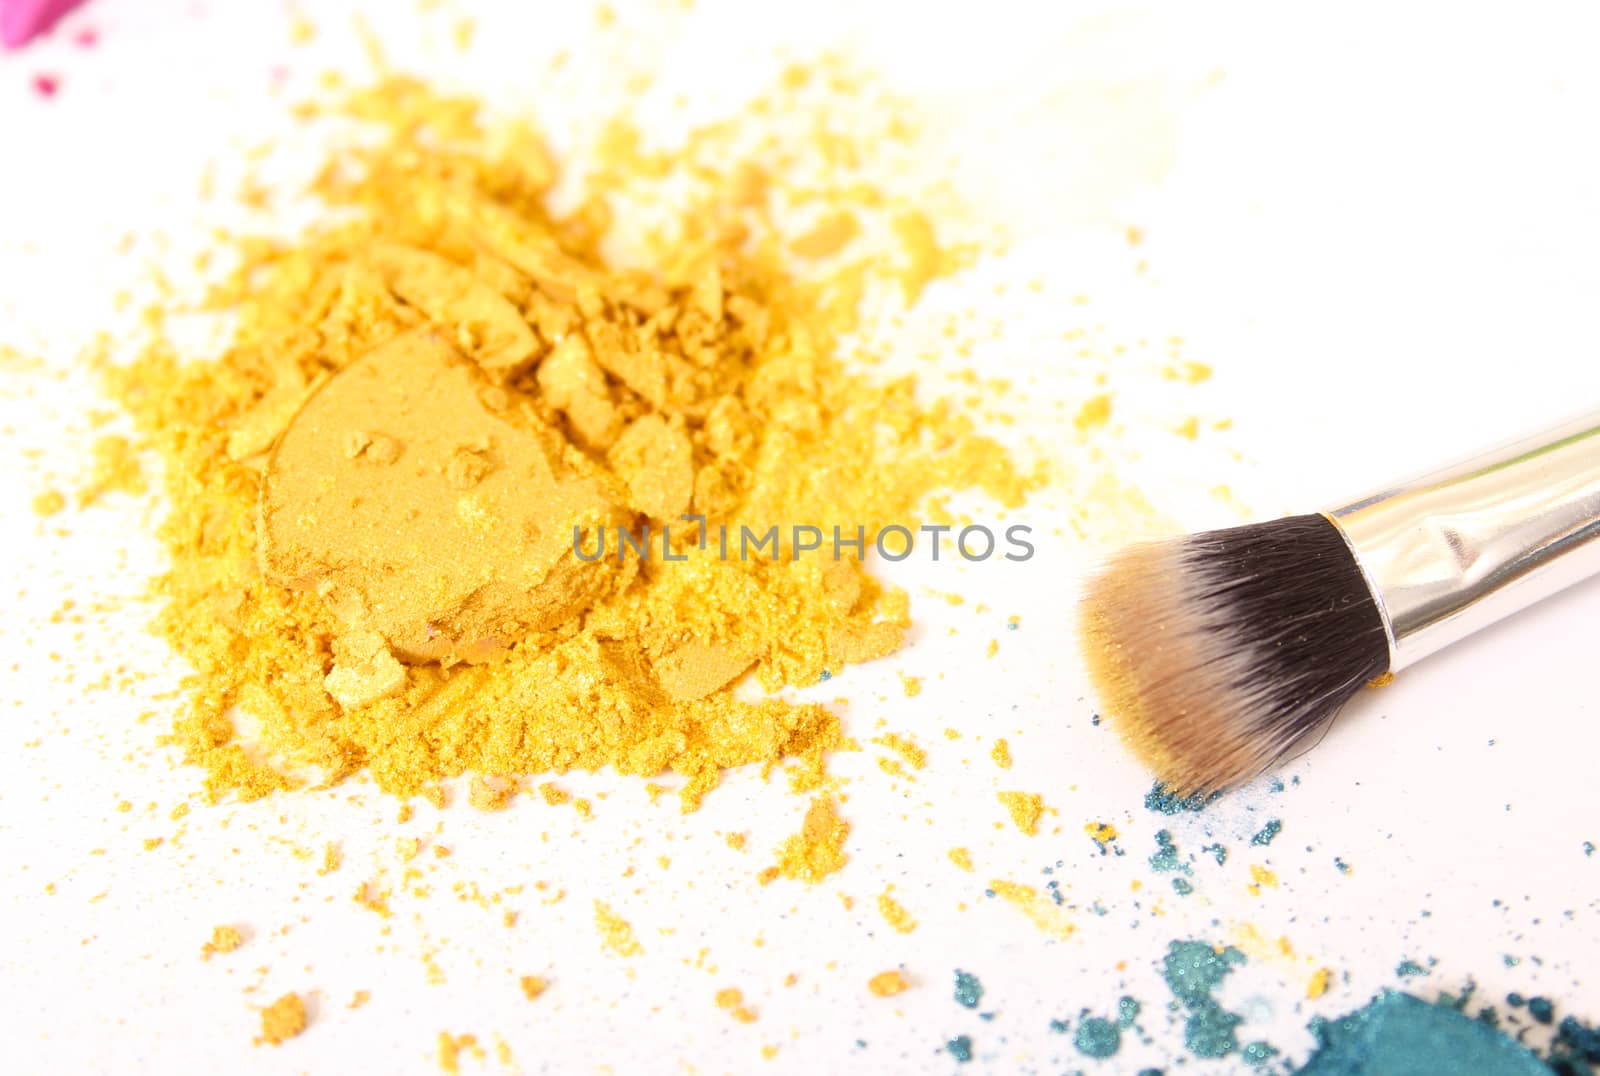 Broken Cosmetic Pigments With Brush on White by Marti157900